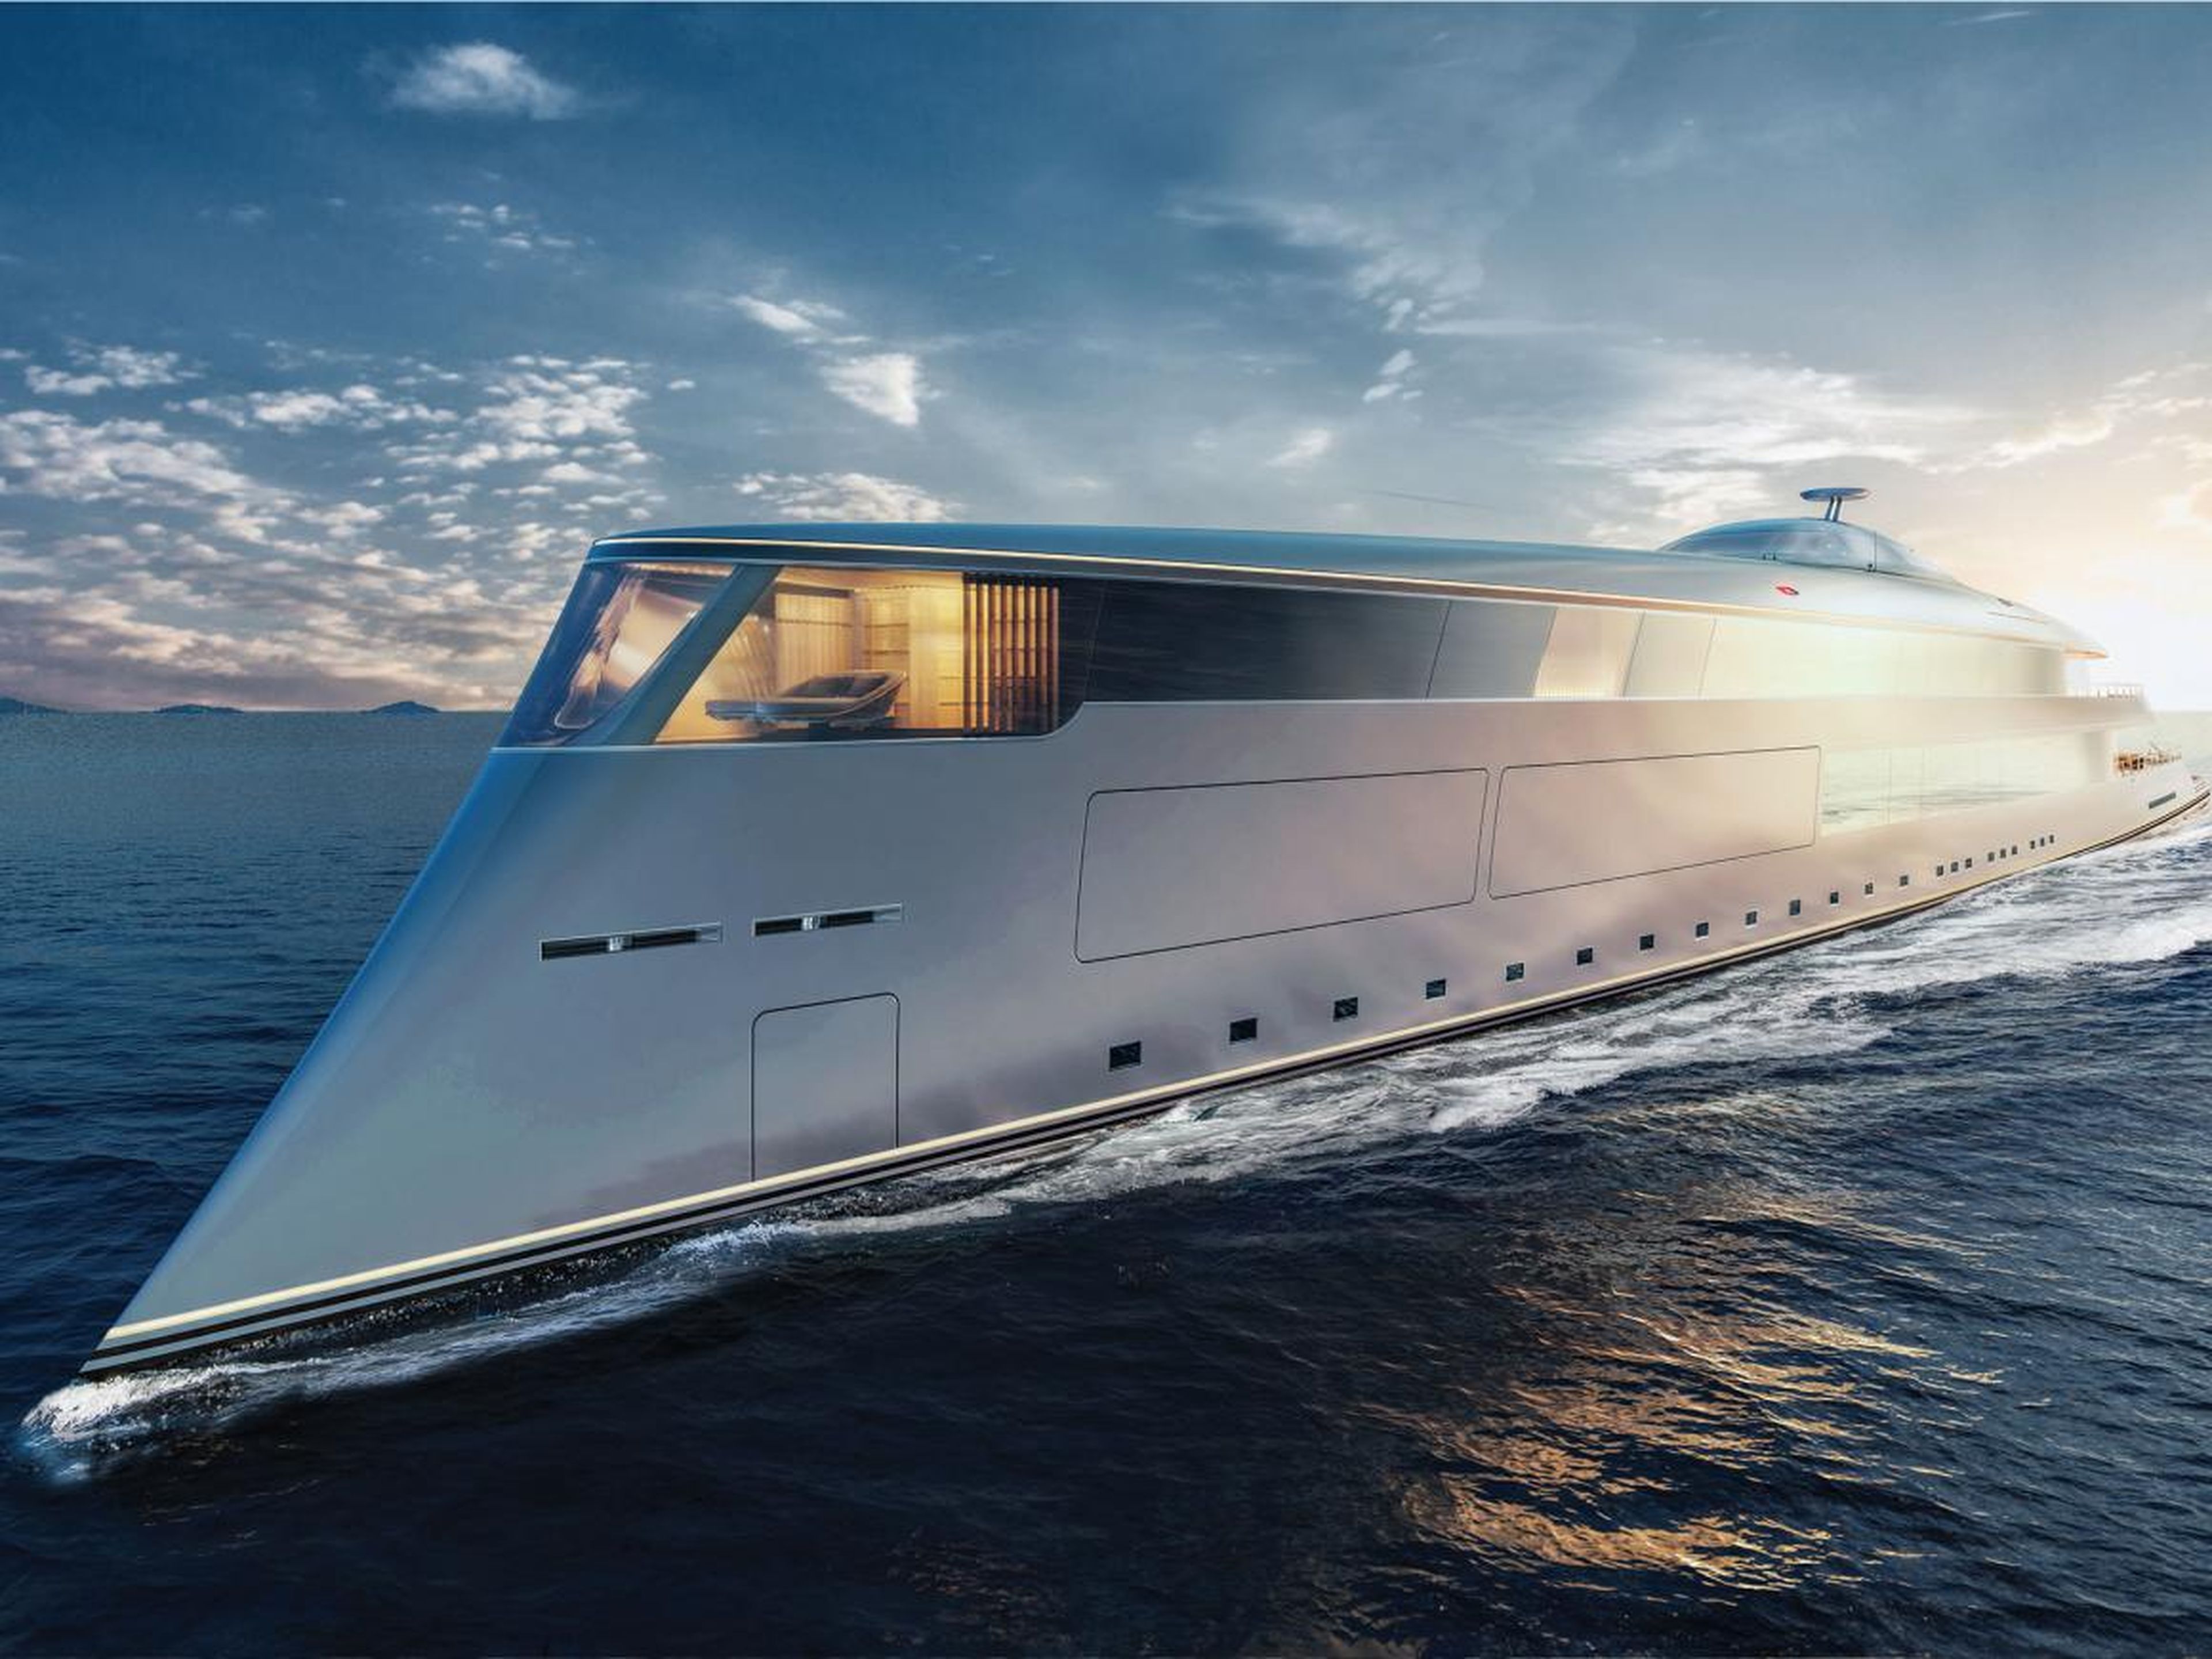 Aqua, the 367-foot superyacht designed to run entirely on liquid hydrogen, would operate at a top speed of 17 knots and have a range of 3,750 nautical miles.